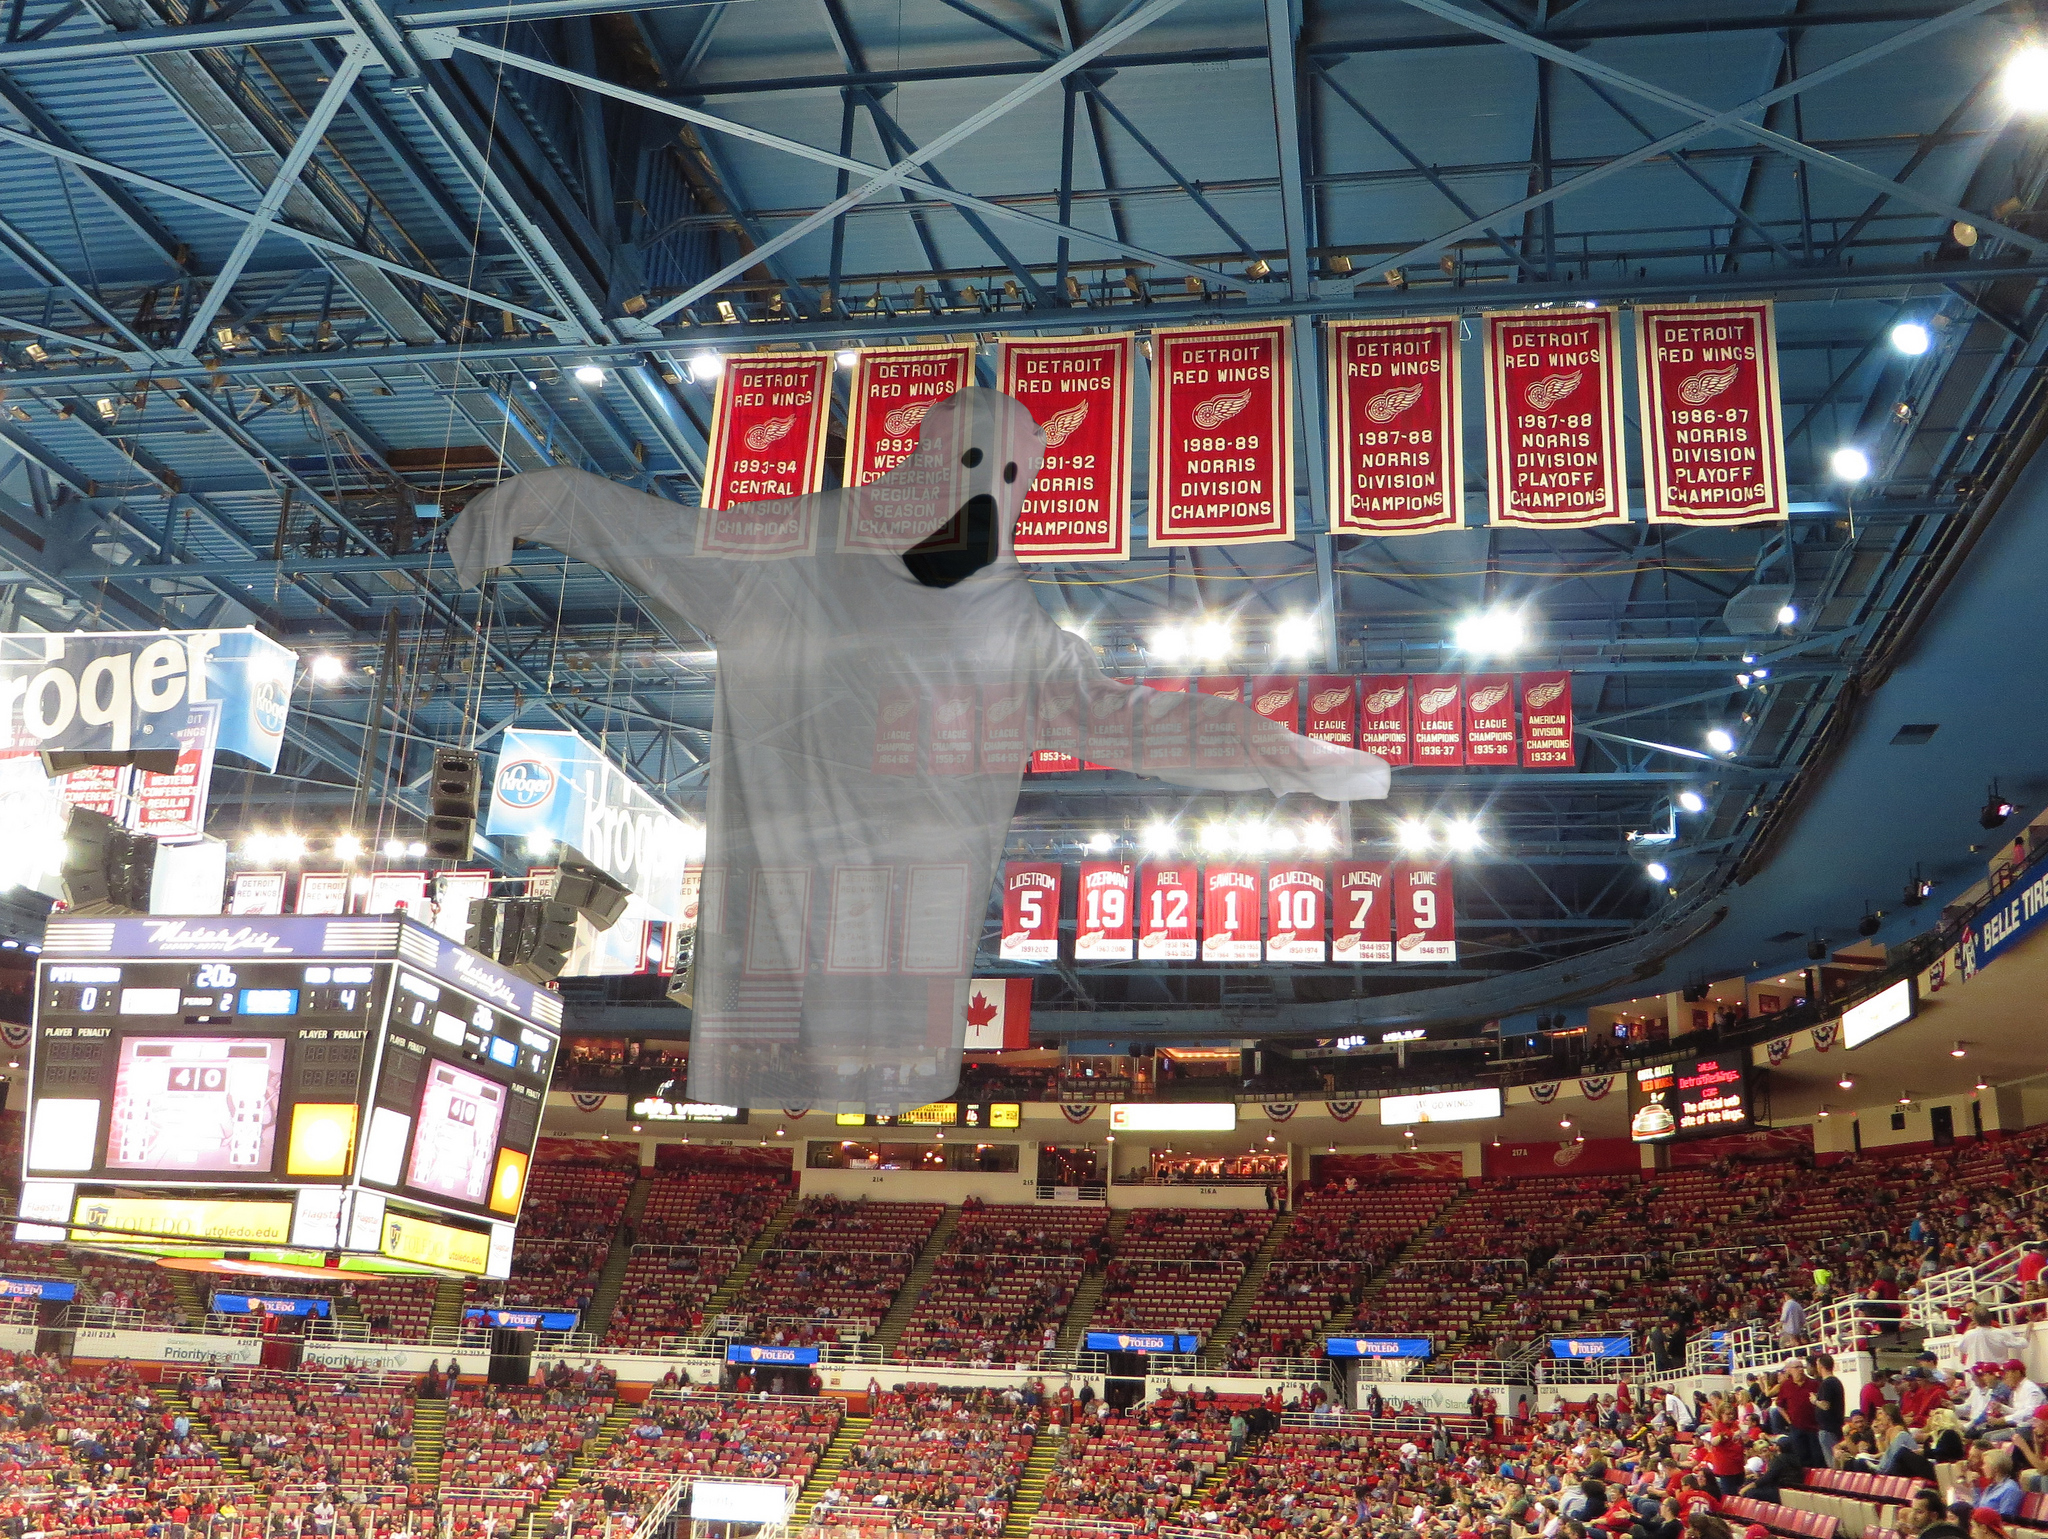 The ghost of Joe Louis Arena happy he won't have to put up with